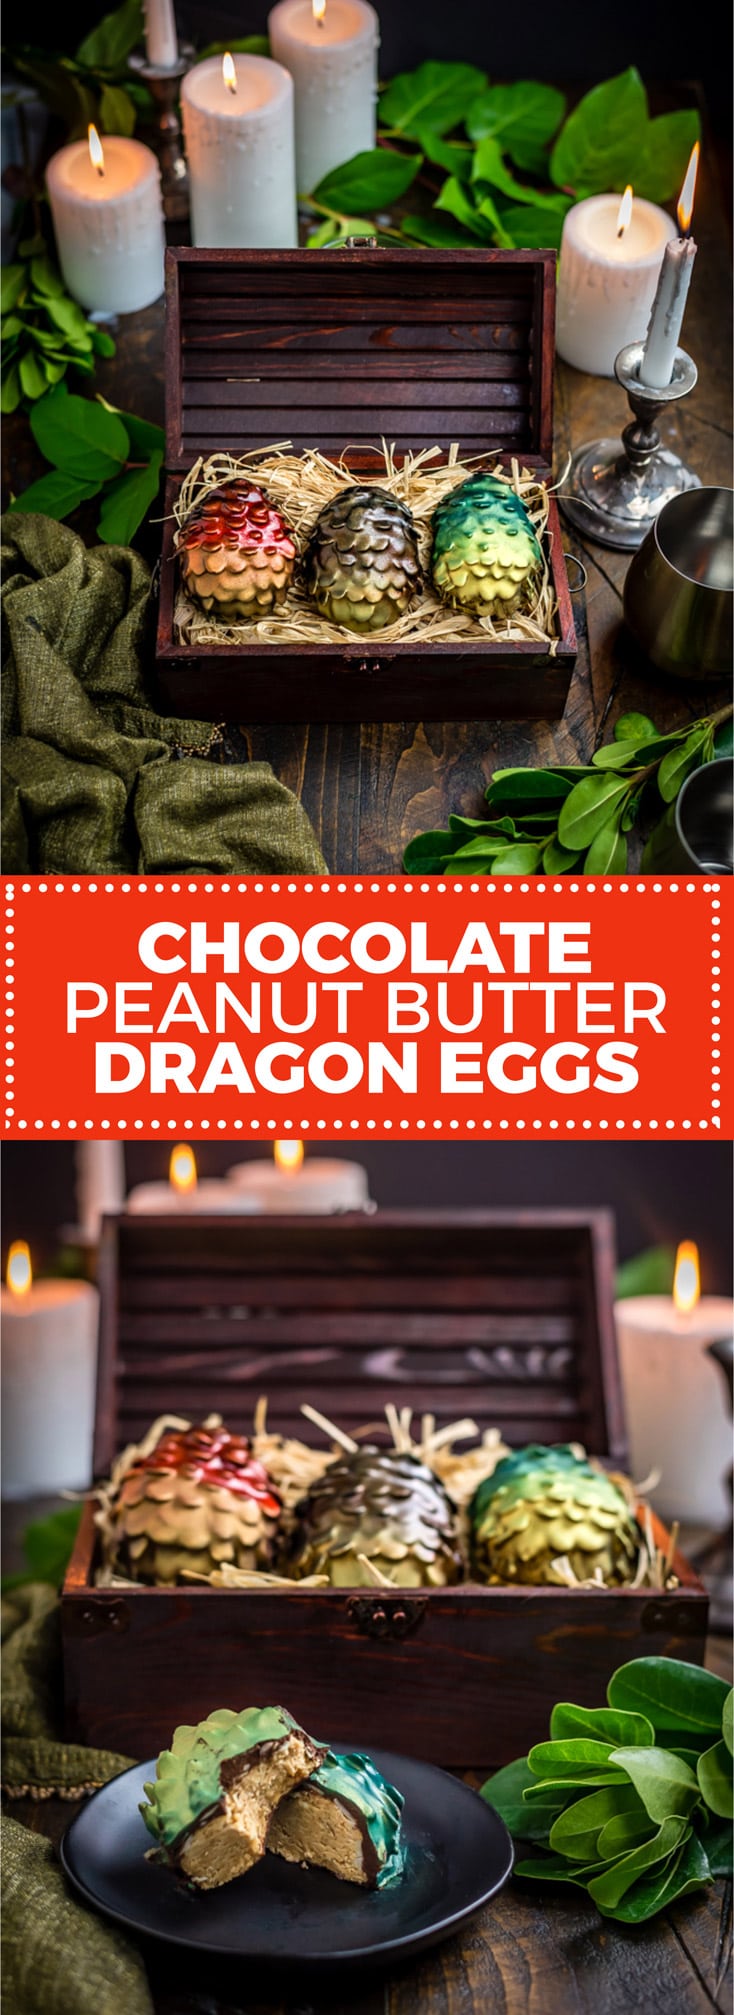 Easter is coming! There's no better way to celebrate the holiday and the return of Game of Thrones than by making your own Chocolate Peanut Butter Dragon Eggs at home. This recipe includes a Reese's-style peanut butter filling, crunchy sliced almond "scales", and a smooth chocolate coating. | hostthetoast.com